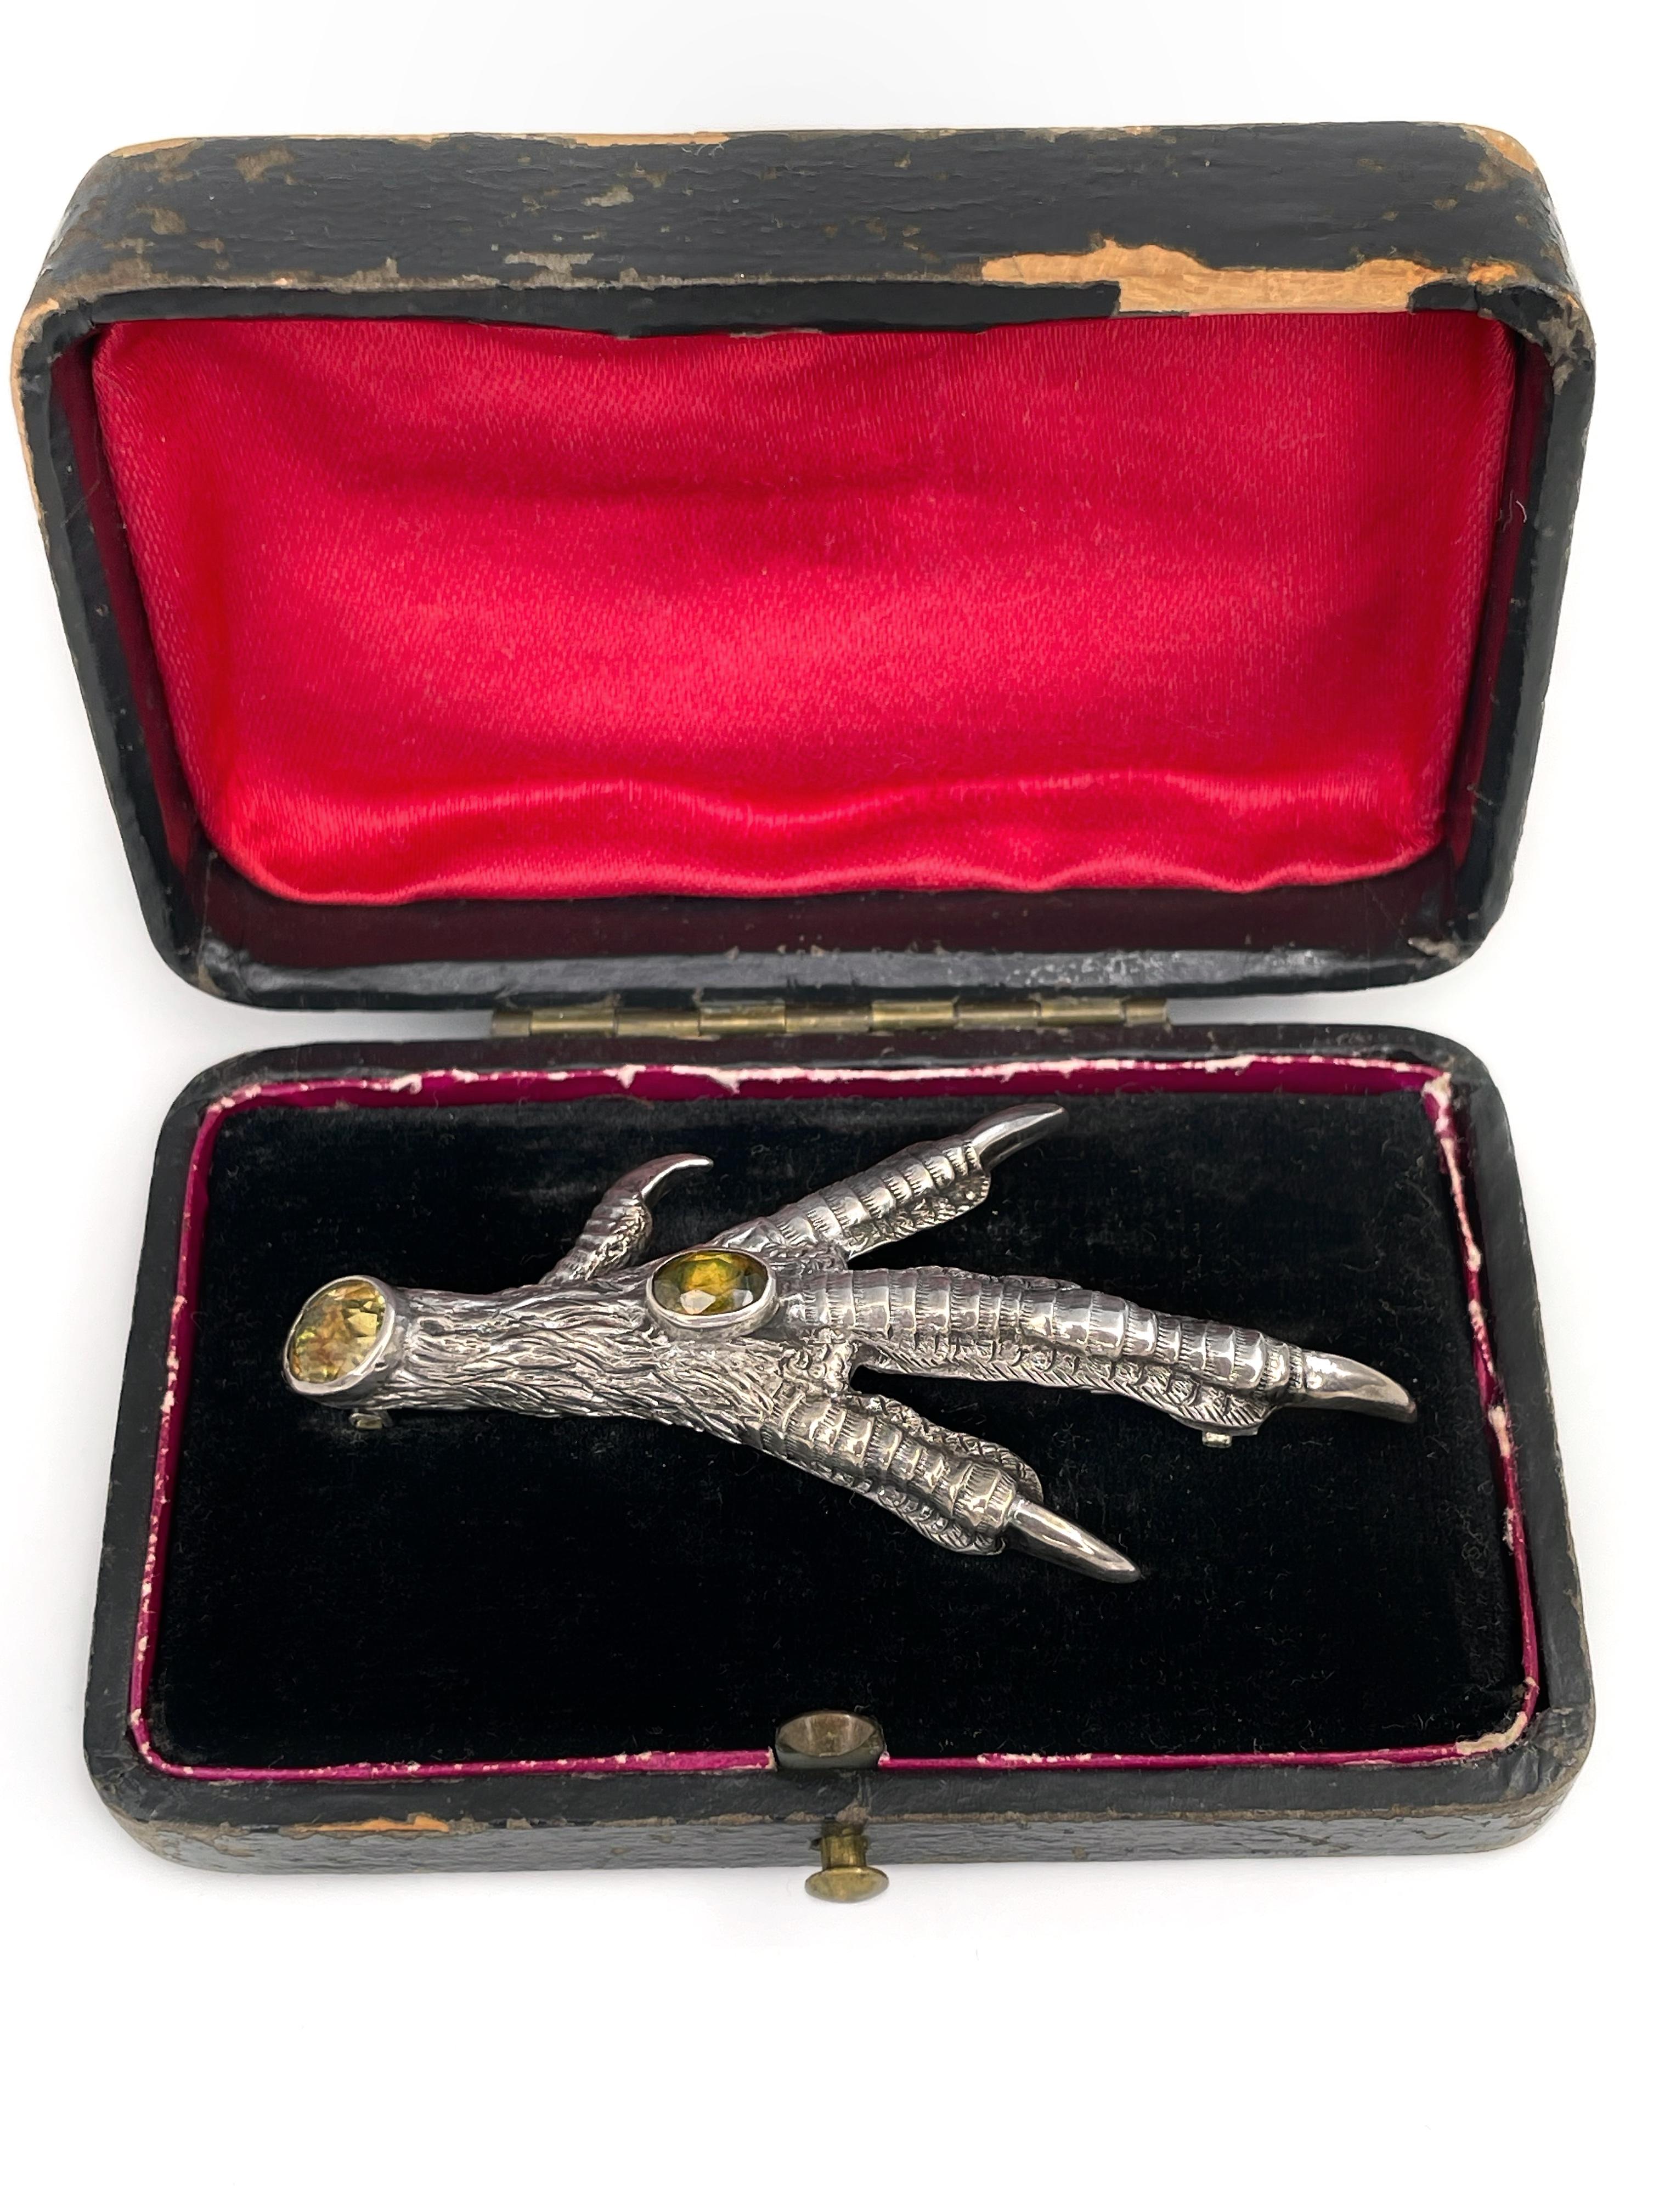 This is a Victorian bird claw shape pin brooch crafted in silver. Circa 1890. The piece features citrines.

Has a C clasp. 
Comes with an original antique box.

Weight: 6.45g
Size: 6x3cm

———

If you have any questions, please feel free to ask. We